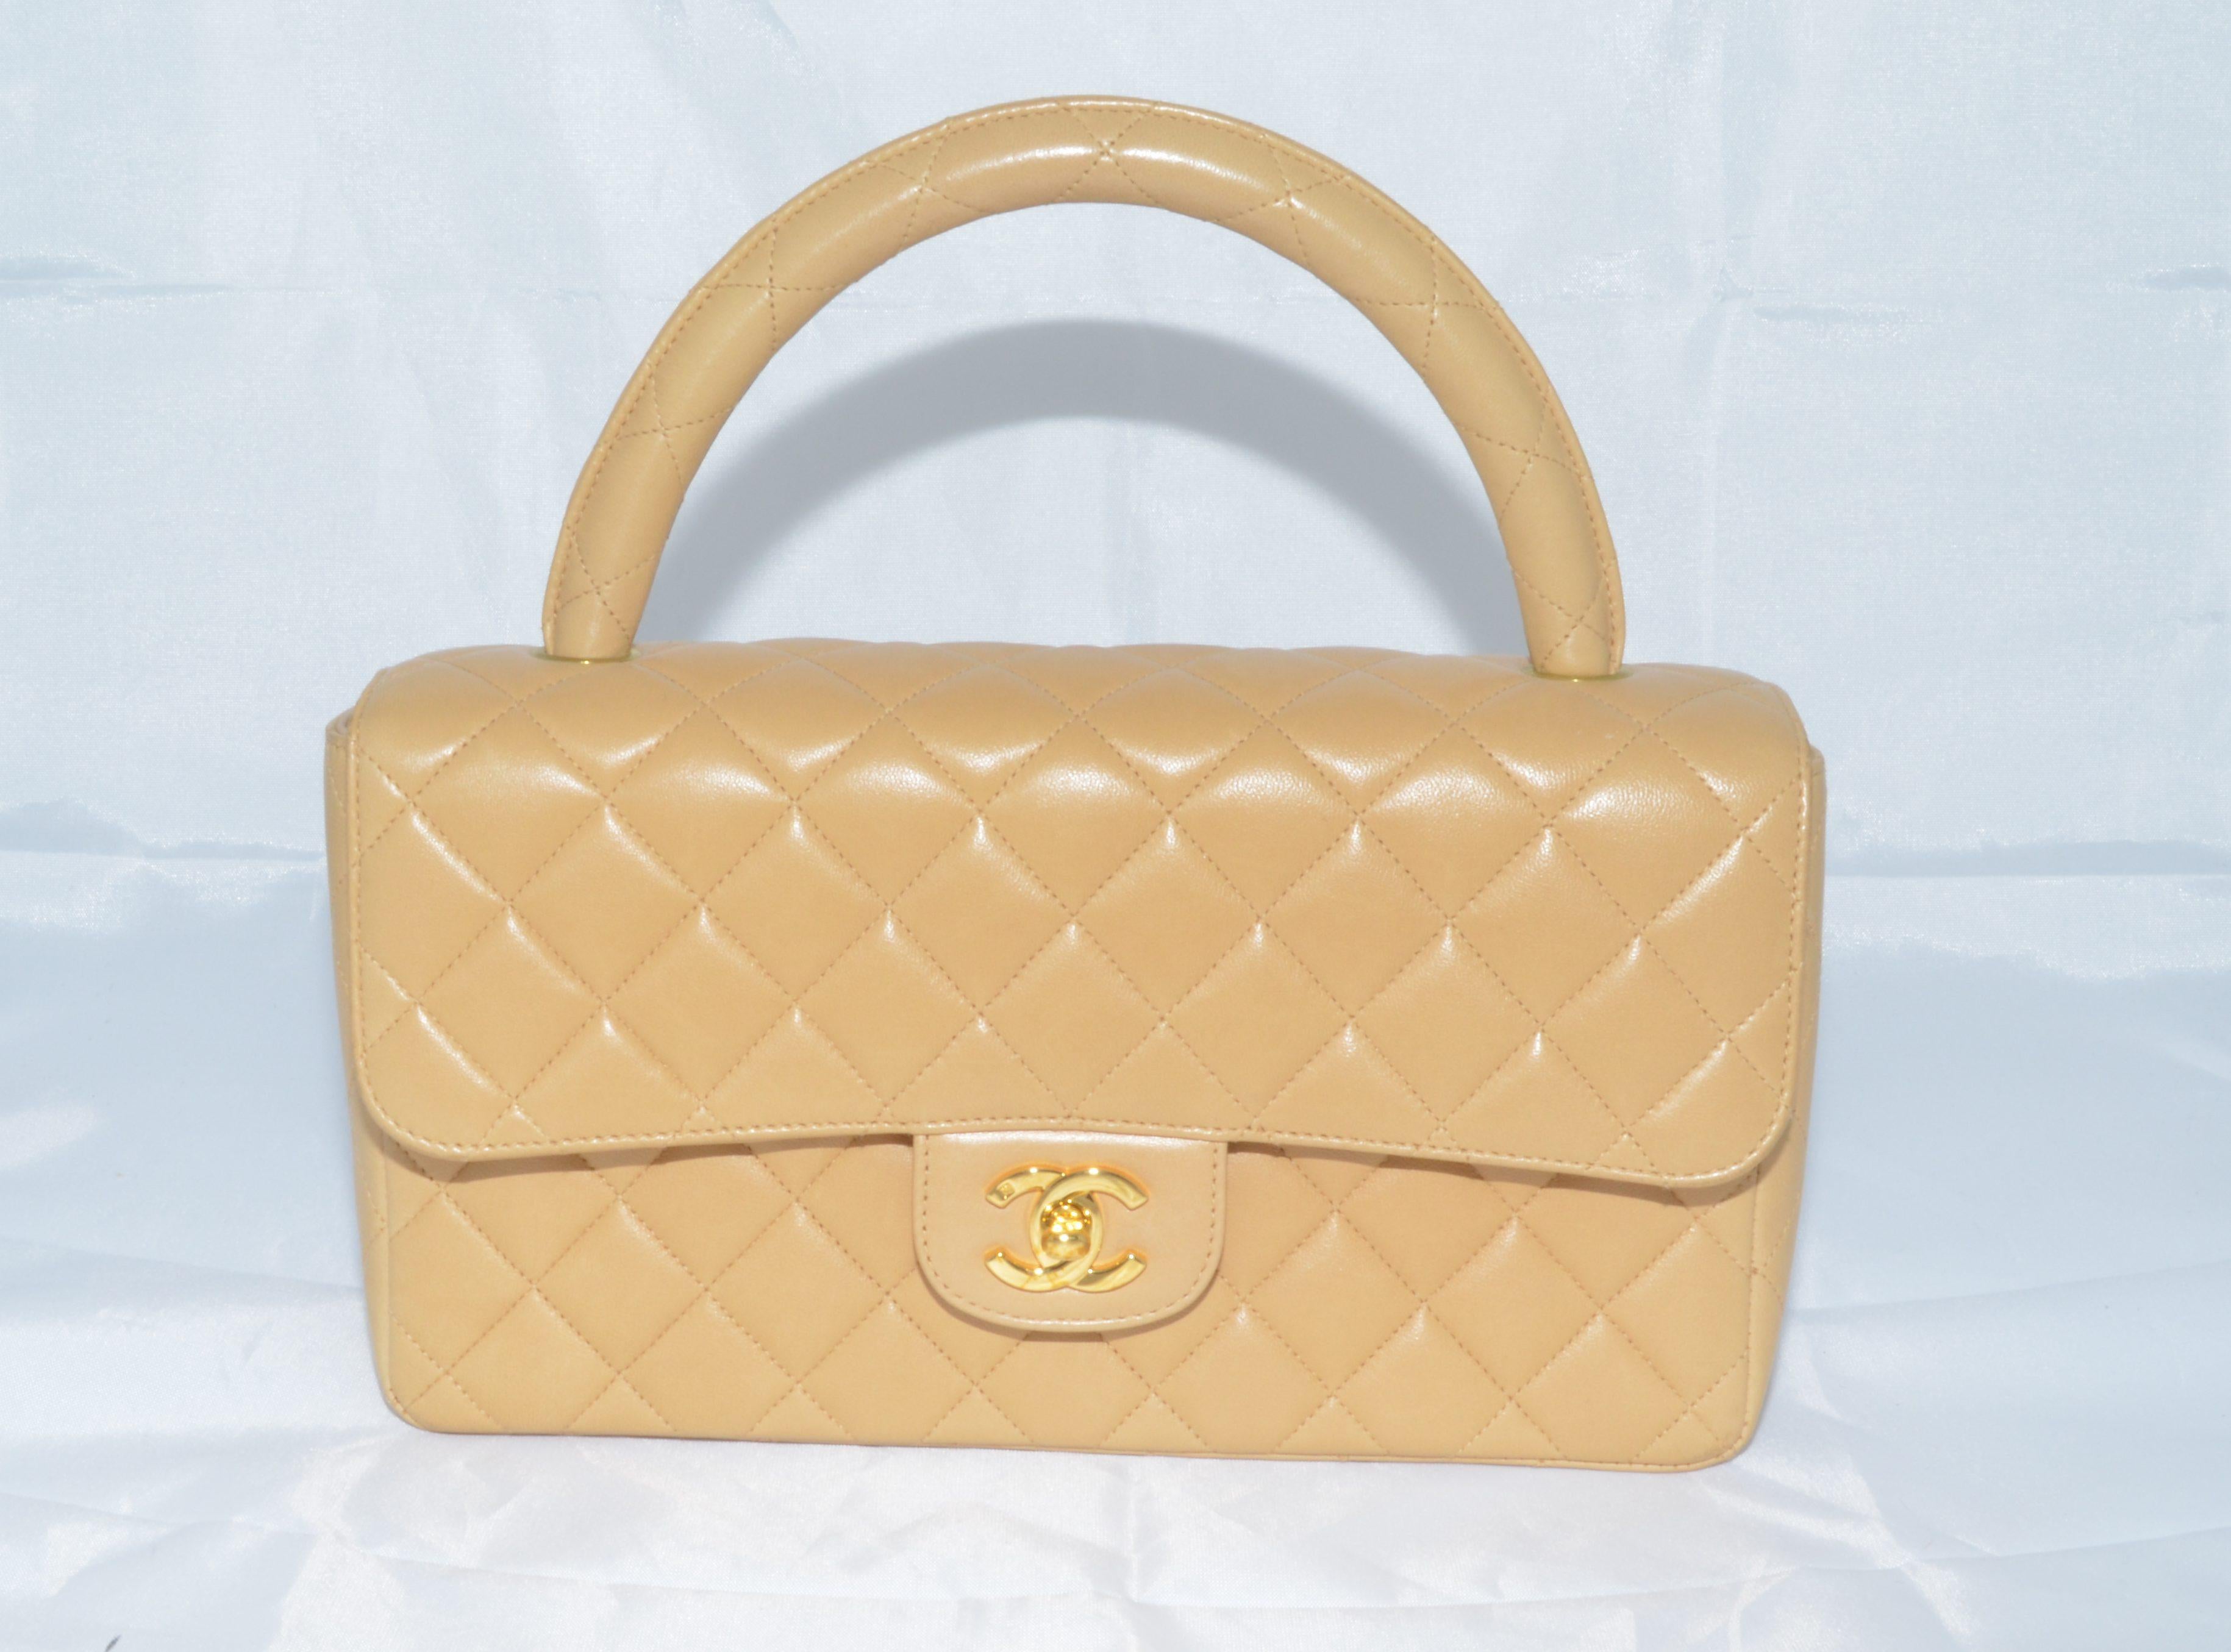 Vintage Chanel bag is featured in a beige-colored quilted leather with a single top handle, back slip pocket, and a signature CC turnlock closure in gold-plated hardware. Interior is fully lined in leather and offers one slip pocket and one zippered